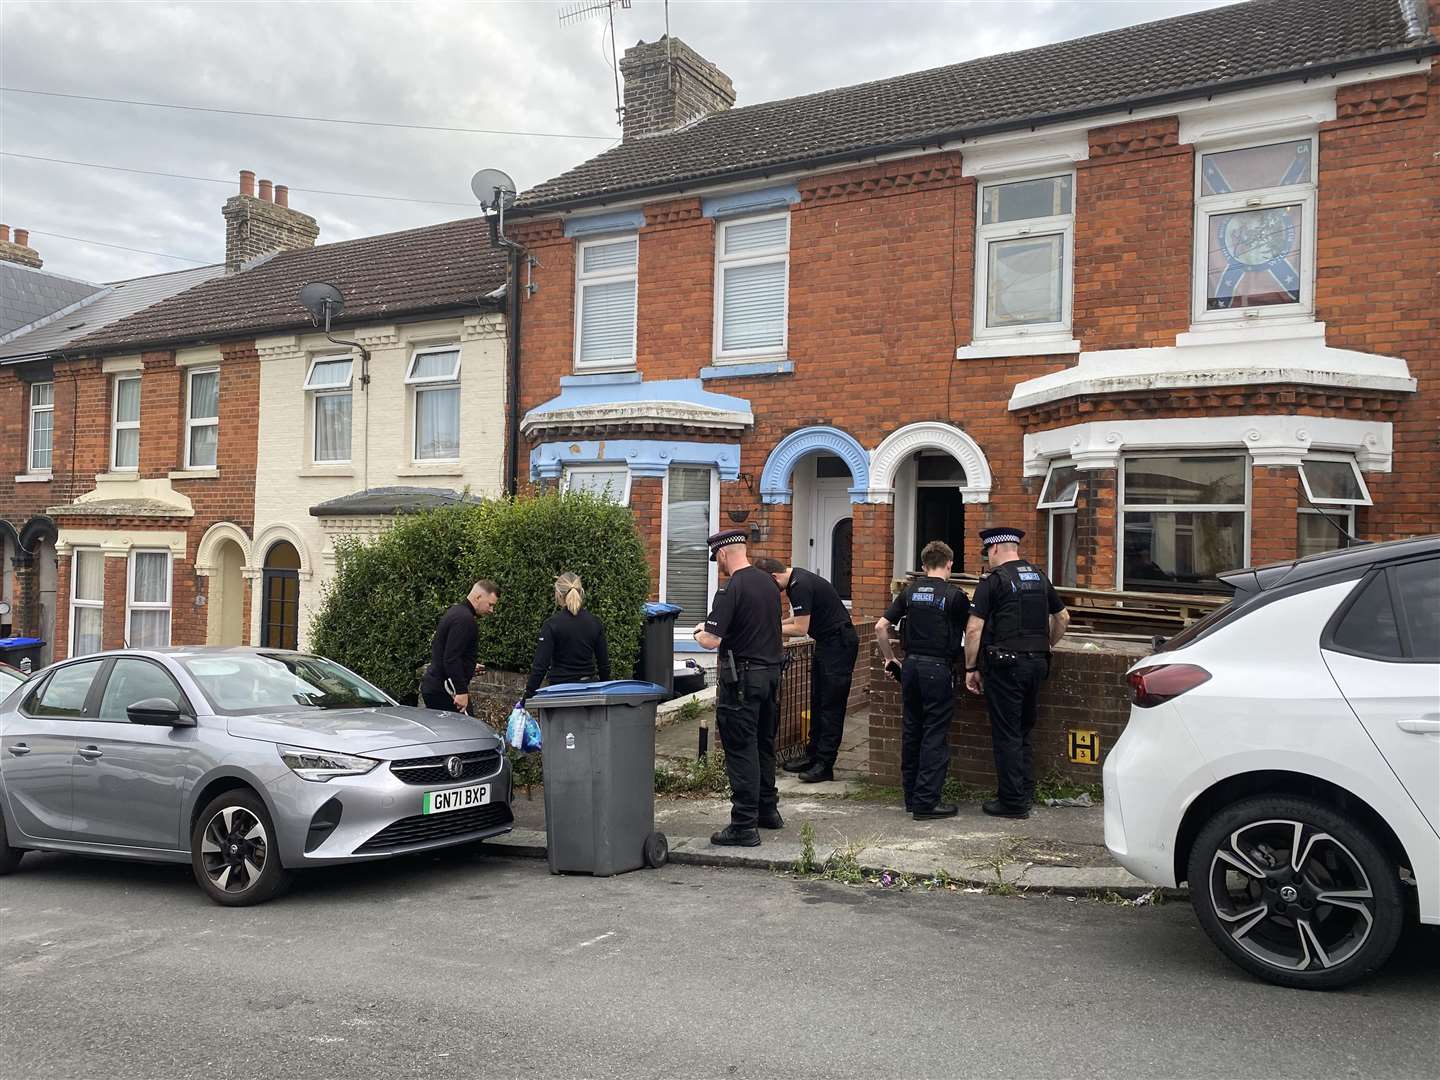 Police searched the home in Lascelles Street, Dover, earlier this year